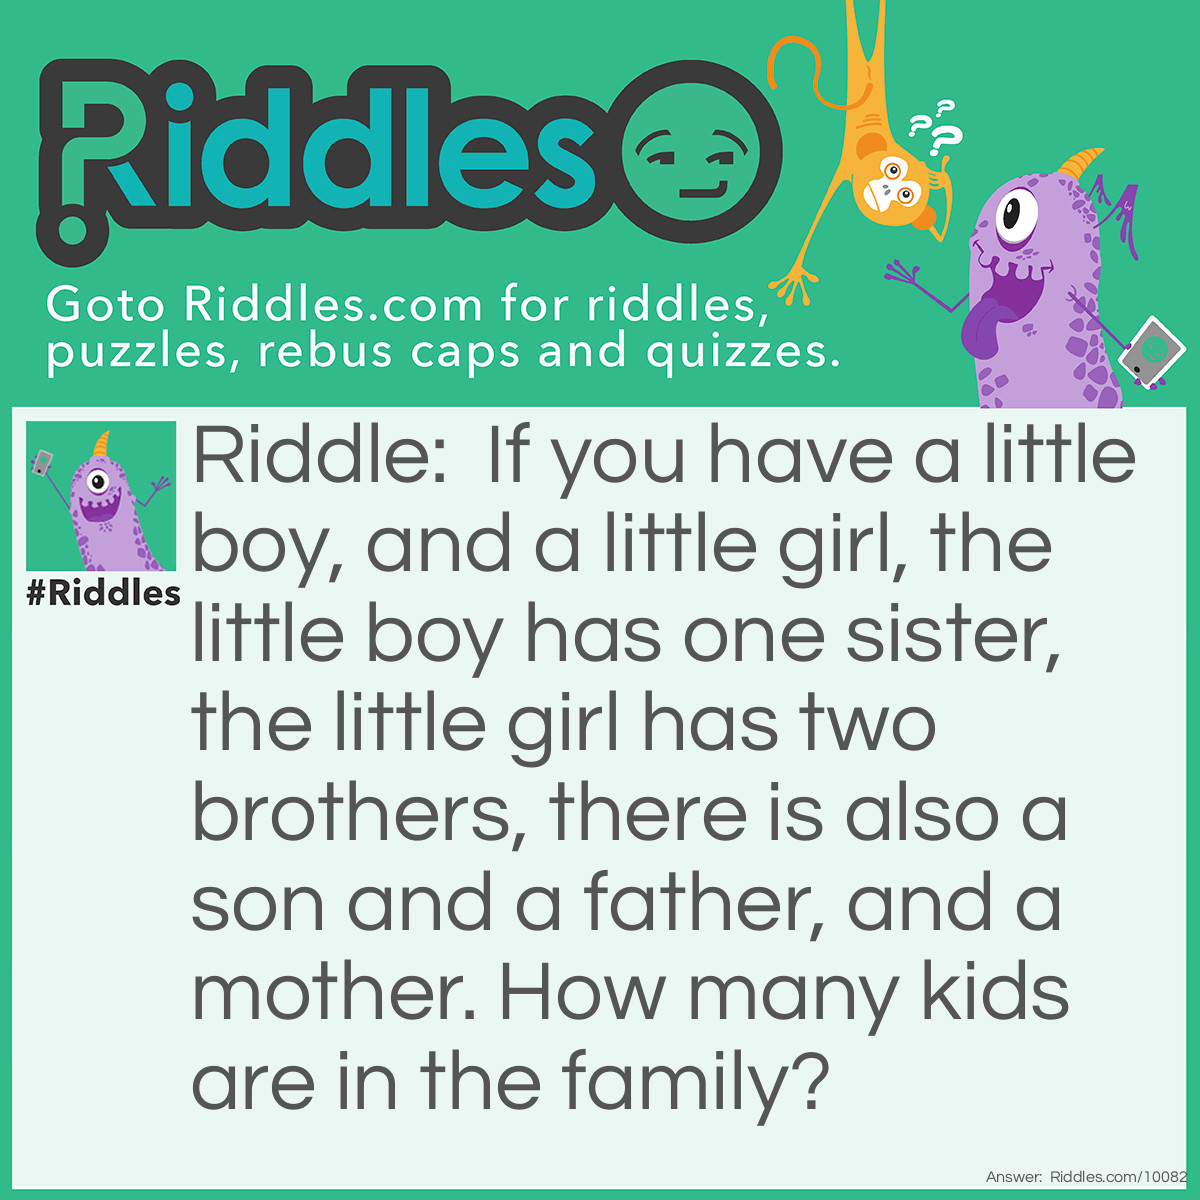 Riddle: If you have a little boy, and a little girl, the little boy has one sister, the little girl has two brothers, there is also a son and a father, and a mother. How many kids are in the family? Answer: There are 4 kids in the family the little boys sister is the little girl one of the little girls brothers in the little boy plus one more the son is also a kid.